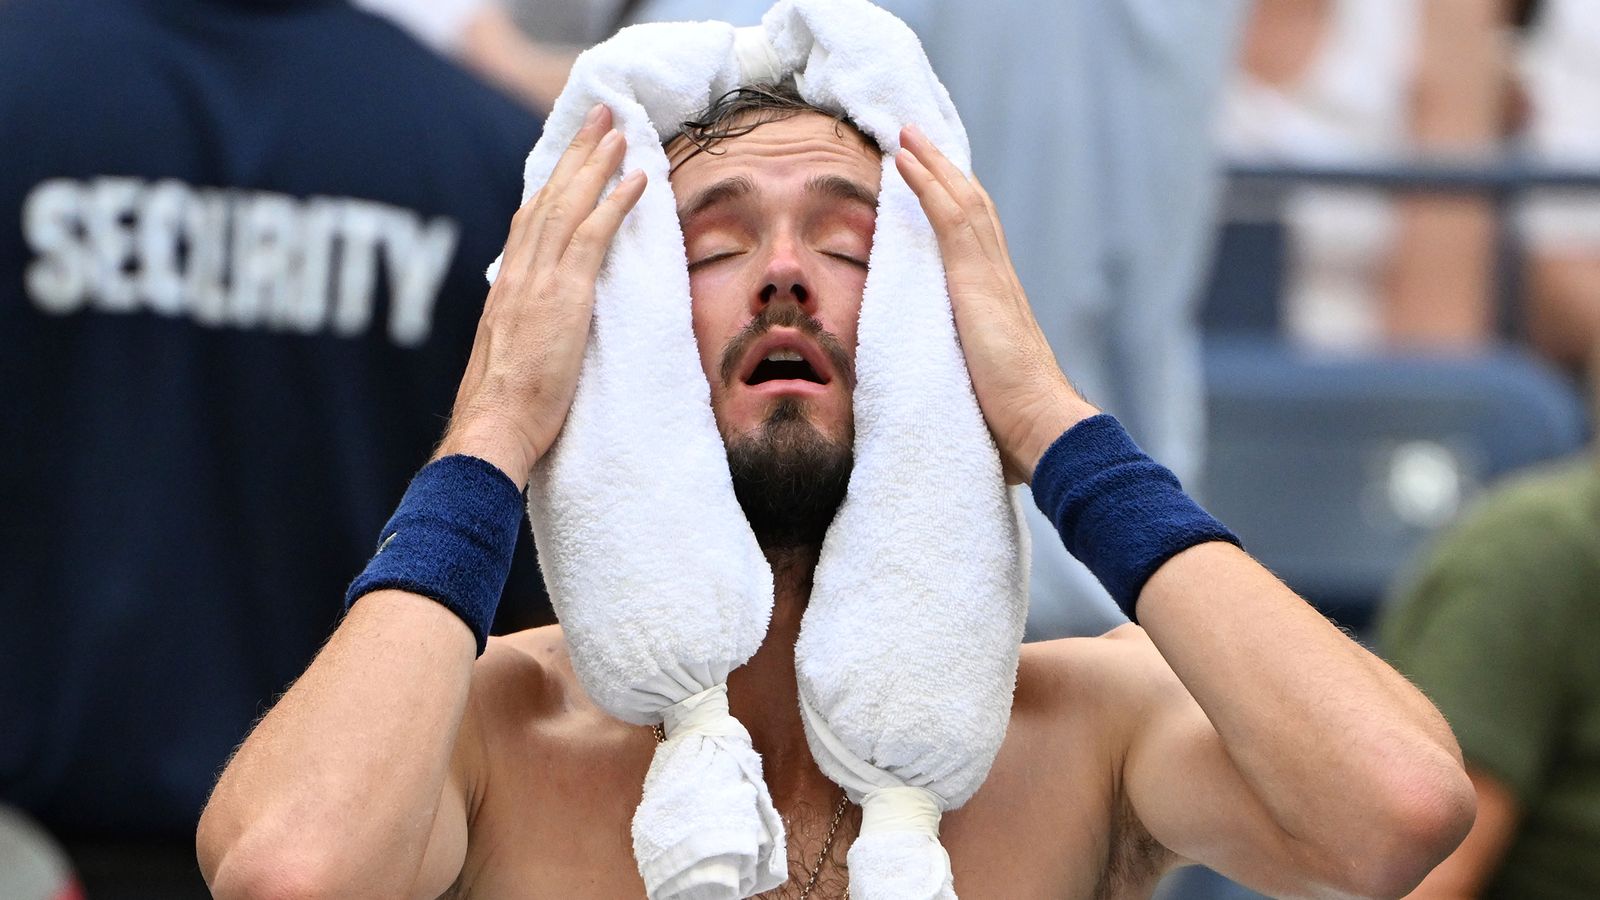 'One player is going to die': Tennis star's shock outburst as he plays final in scorching conditions